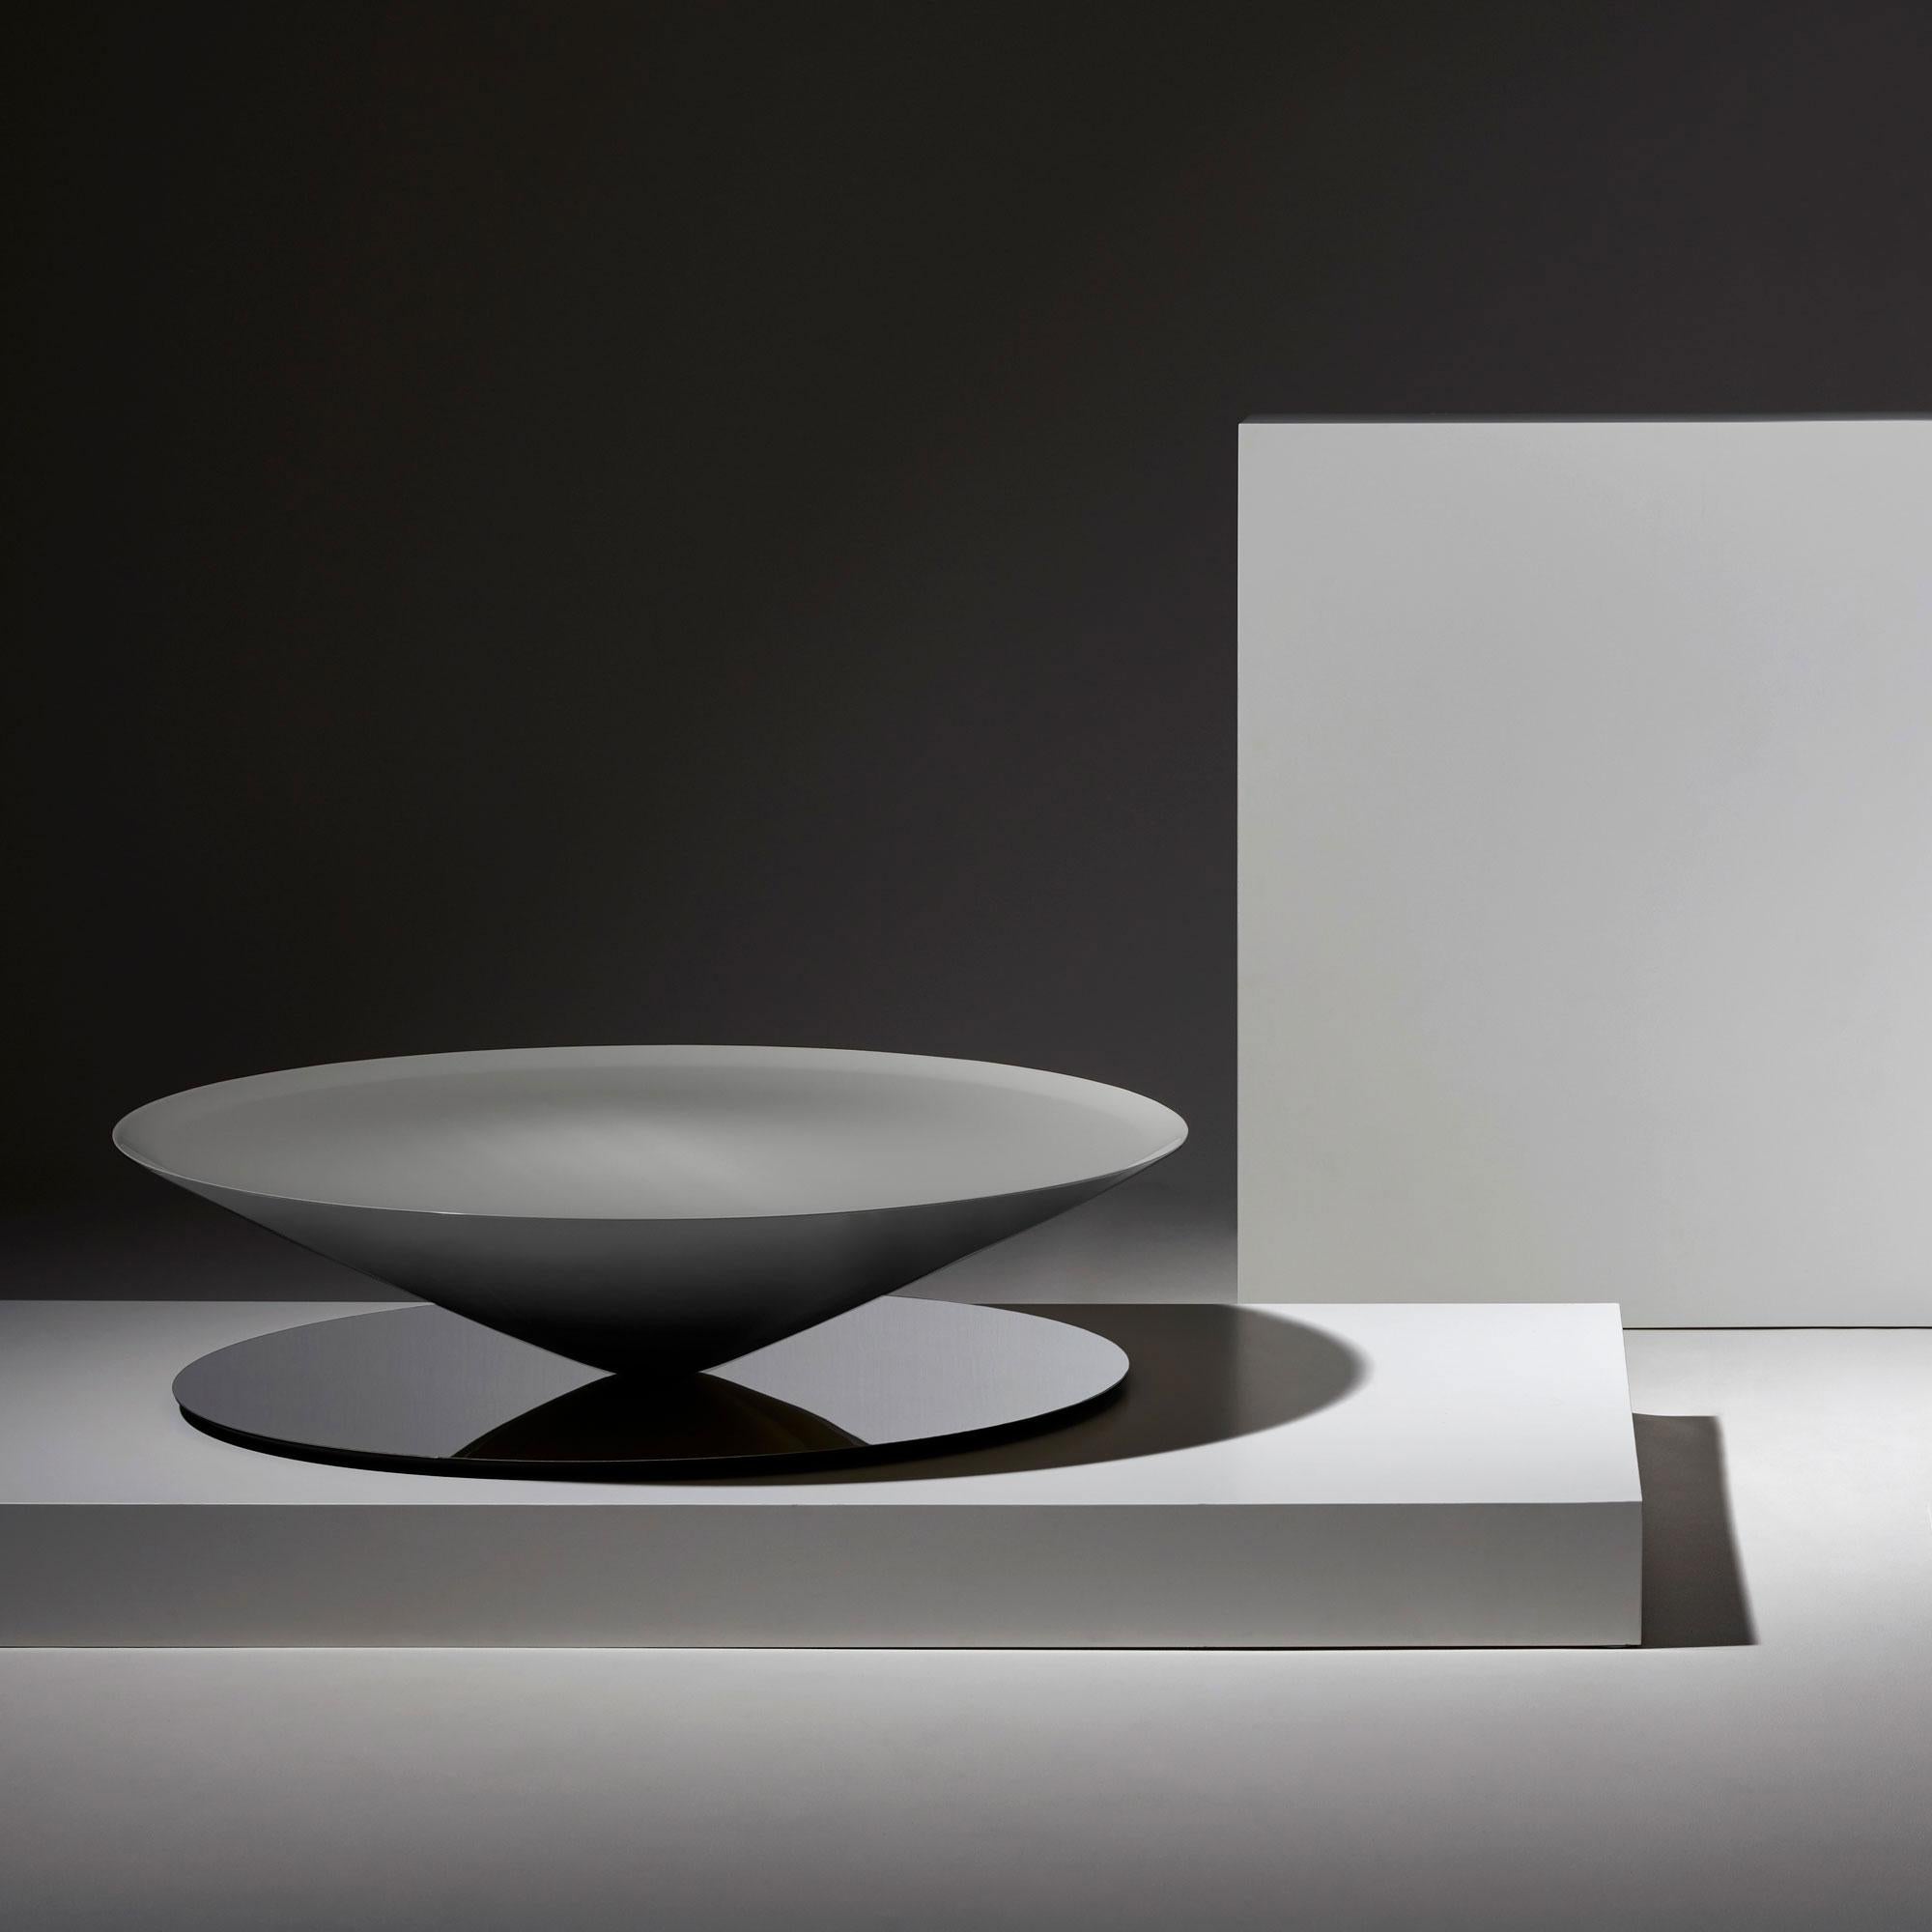 Float is a sculptural coffee table that challenges senses and perception. A massive metal cone apparently floats above a mirror polished steel base.
The geometrical design is softened by refined details such as the bezelled lip on the edges of the